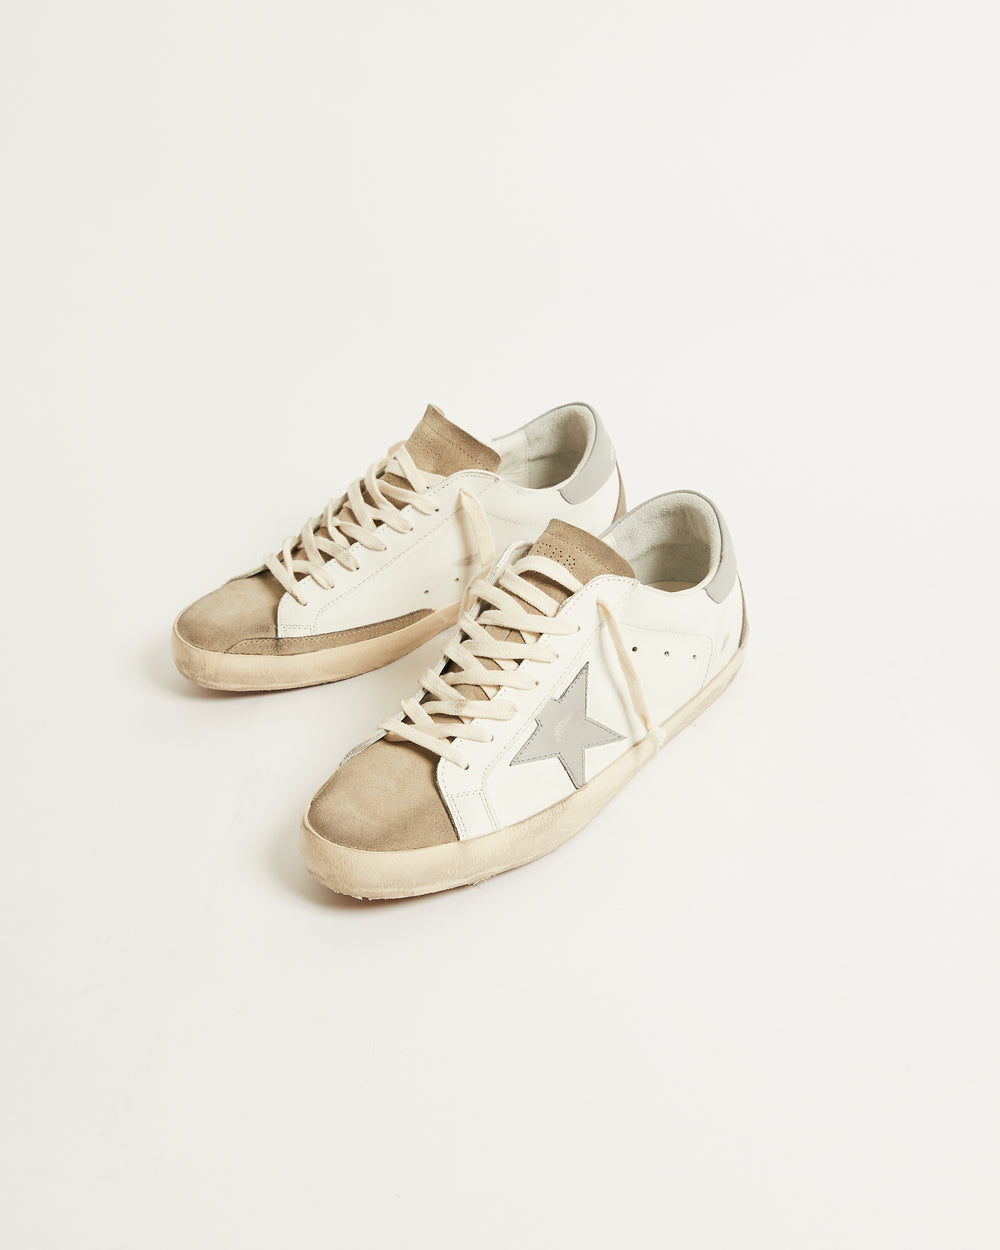 Super Star in White Leather w/ Suede Toe and Grey Star